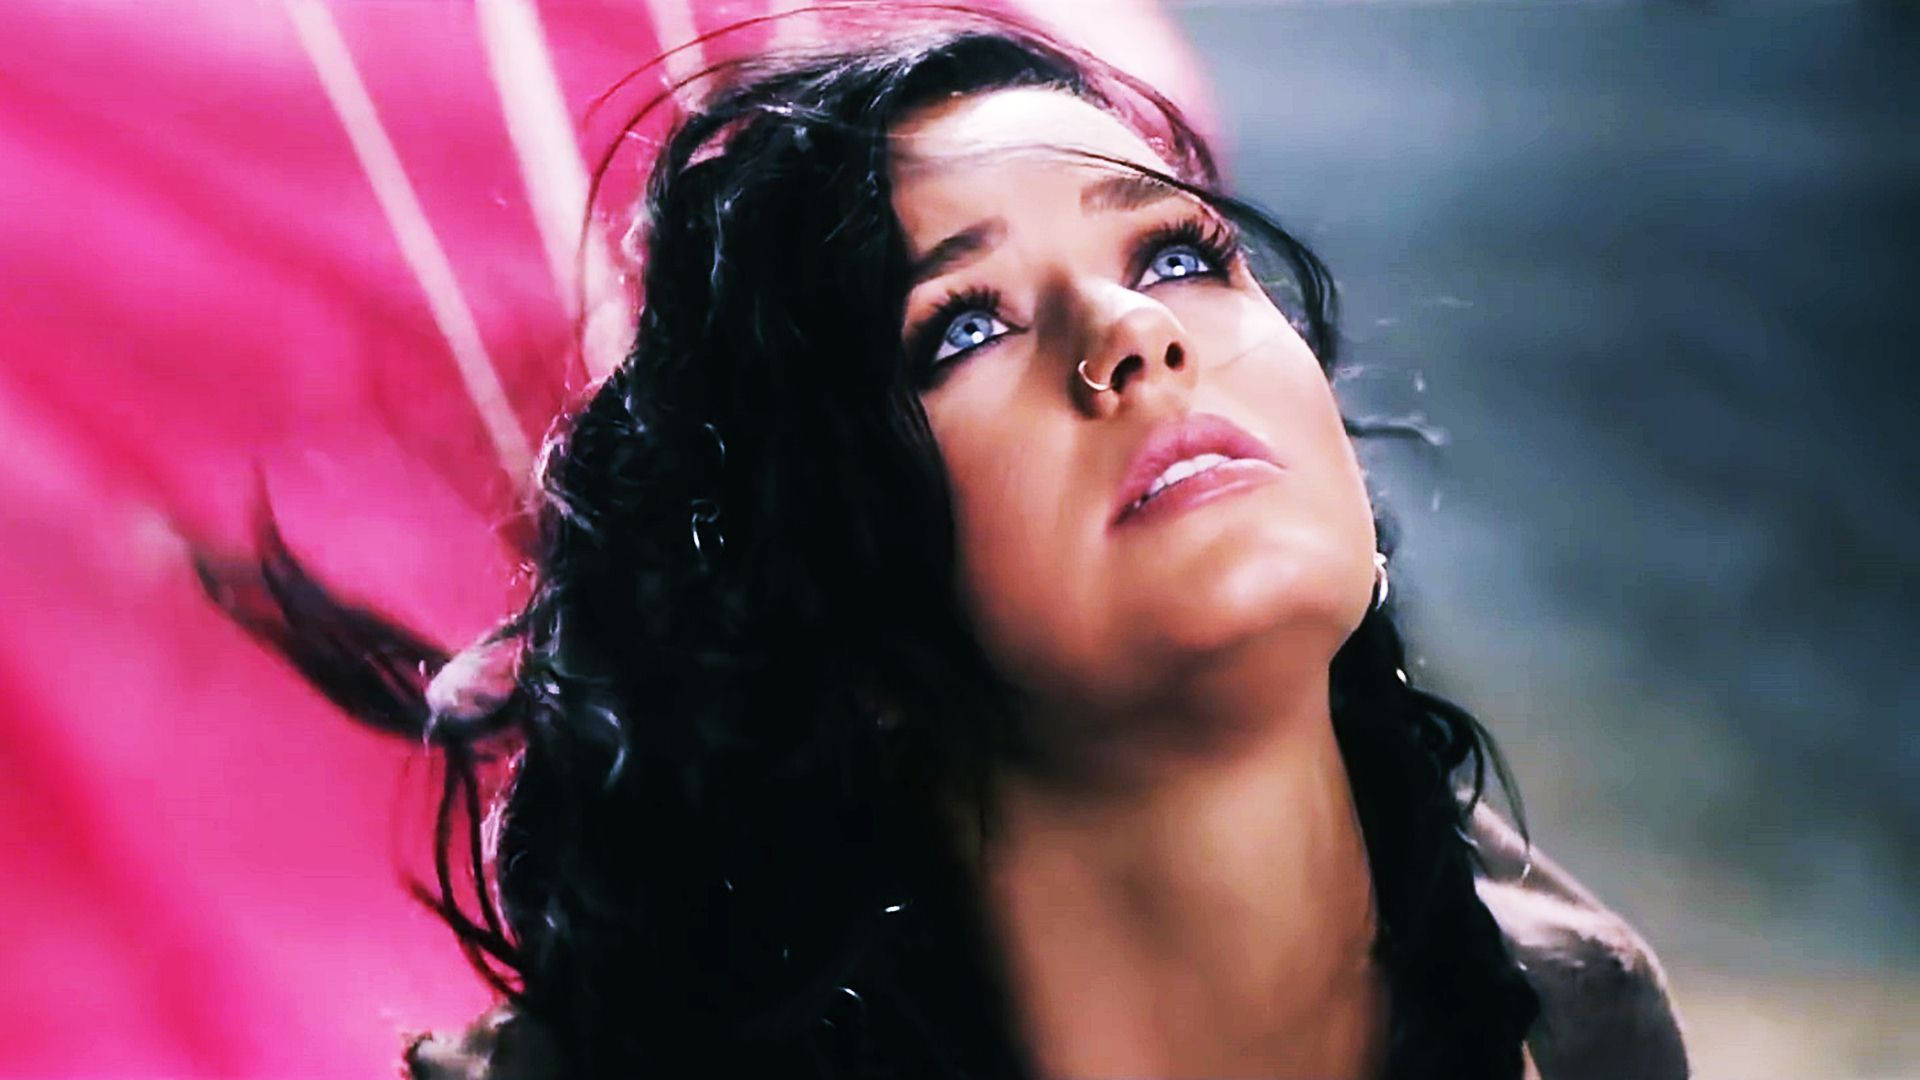 Katy Perry in the Rise Music Video Wallpaper